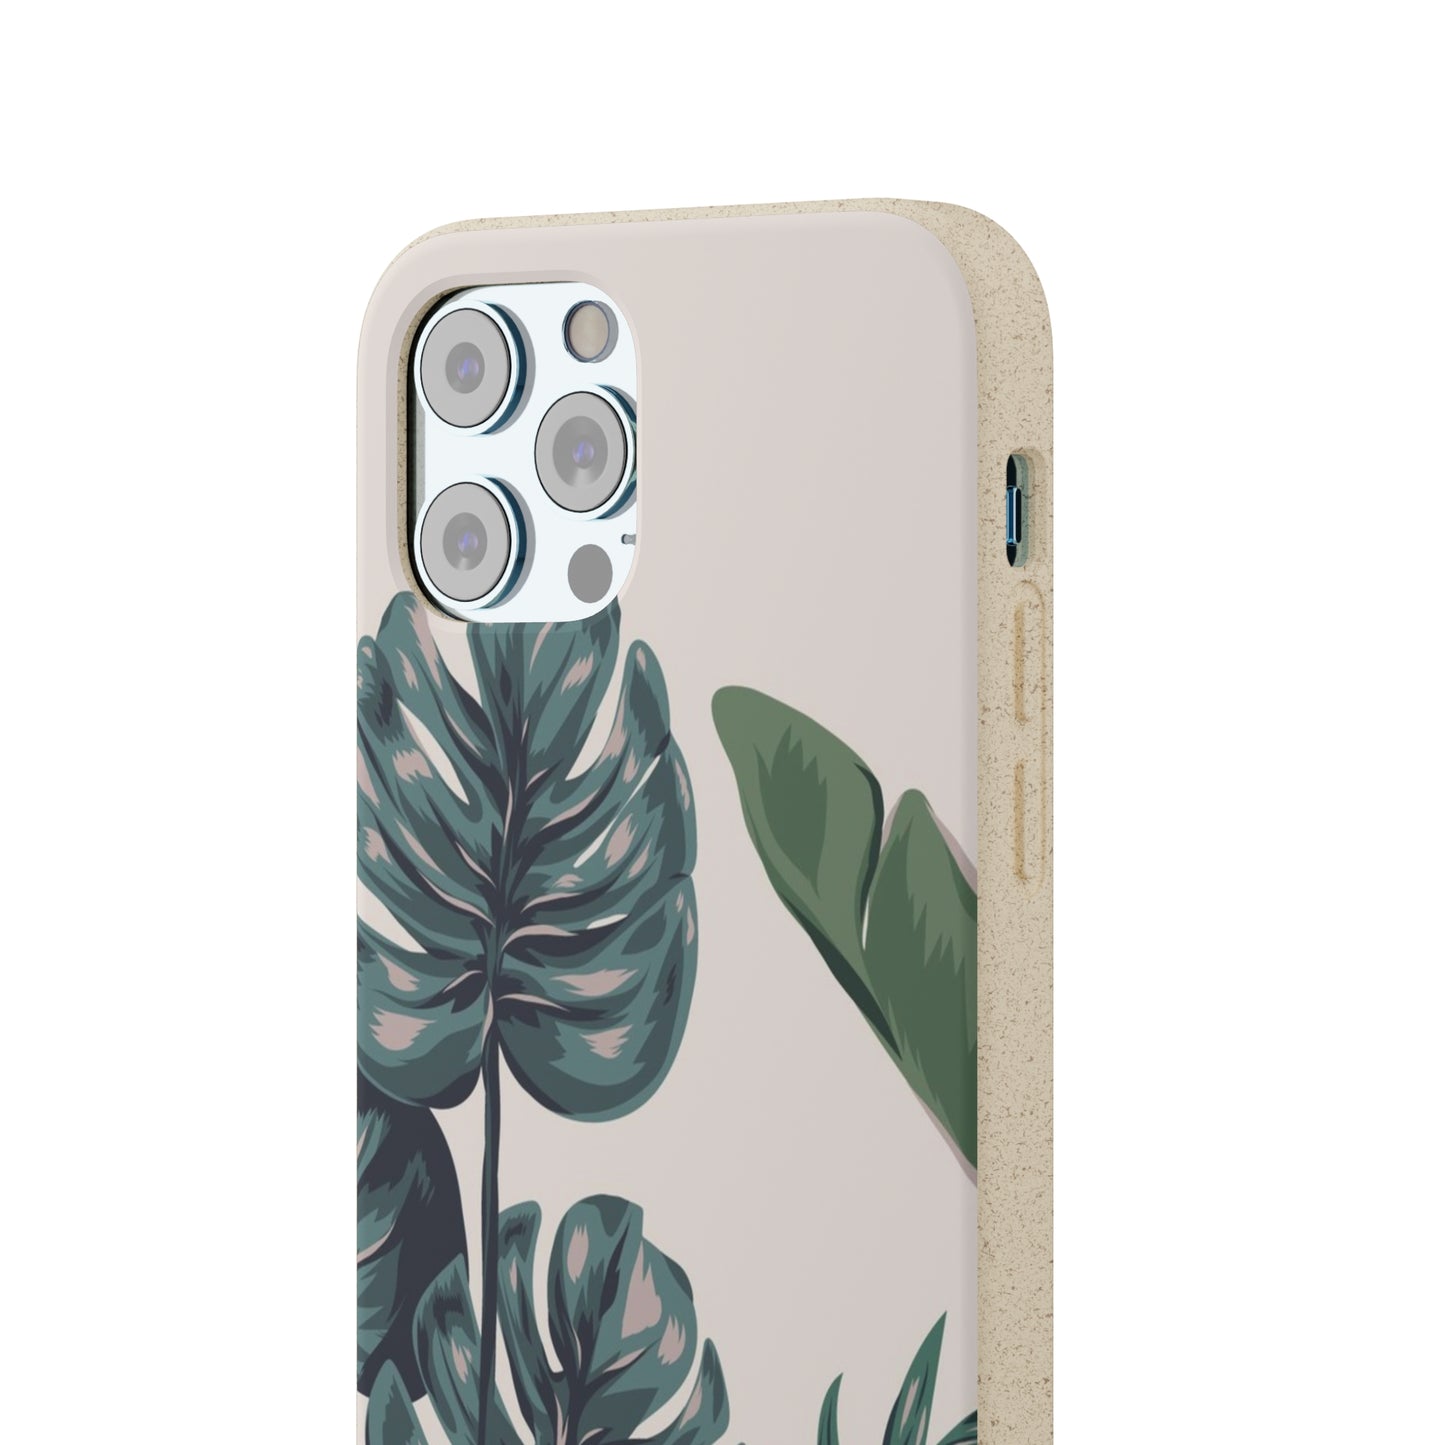 Tropical leaves iPhone 13 12 Pro Case, 11 Vegan Biodegradable Compostable Plant Samsung Galaxy S20 S21 S22 Eco Friendly Cell Phone Starcove Fashion